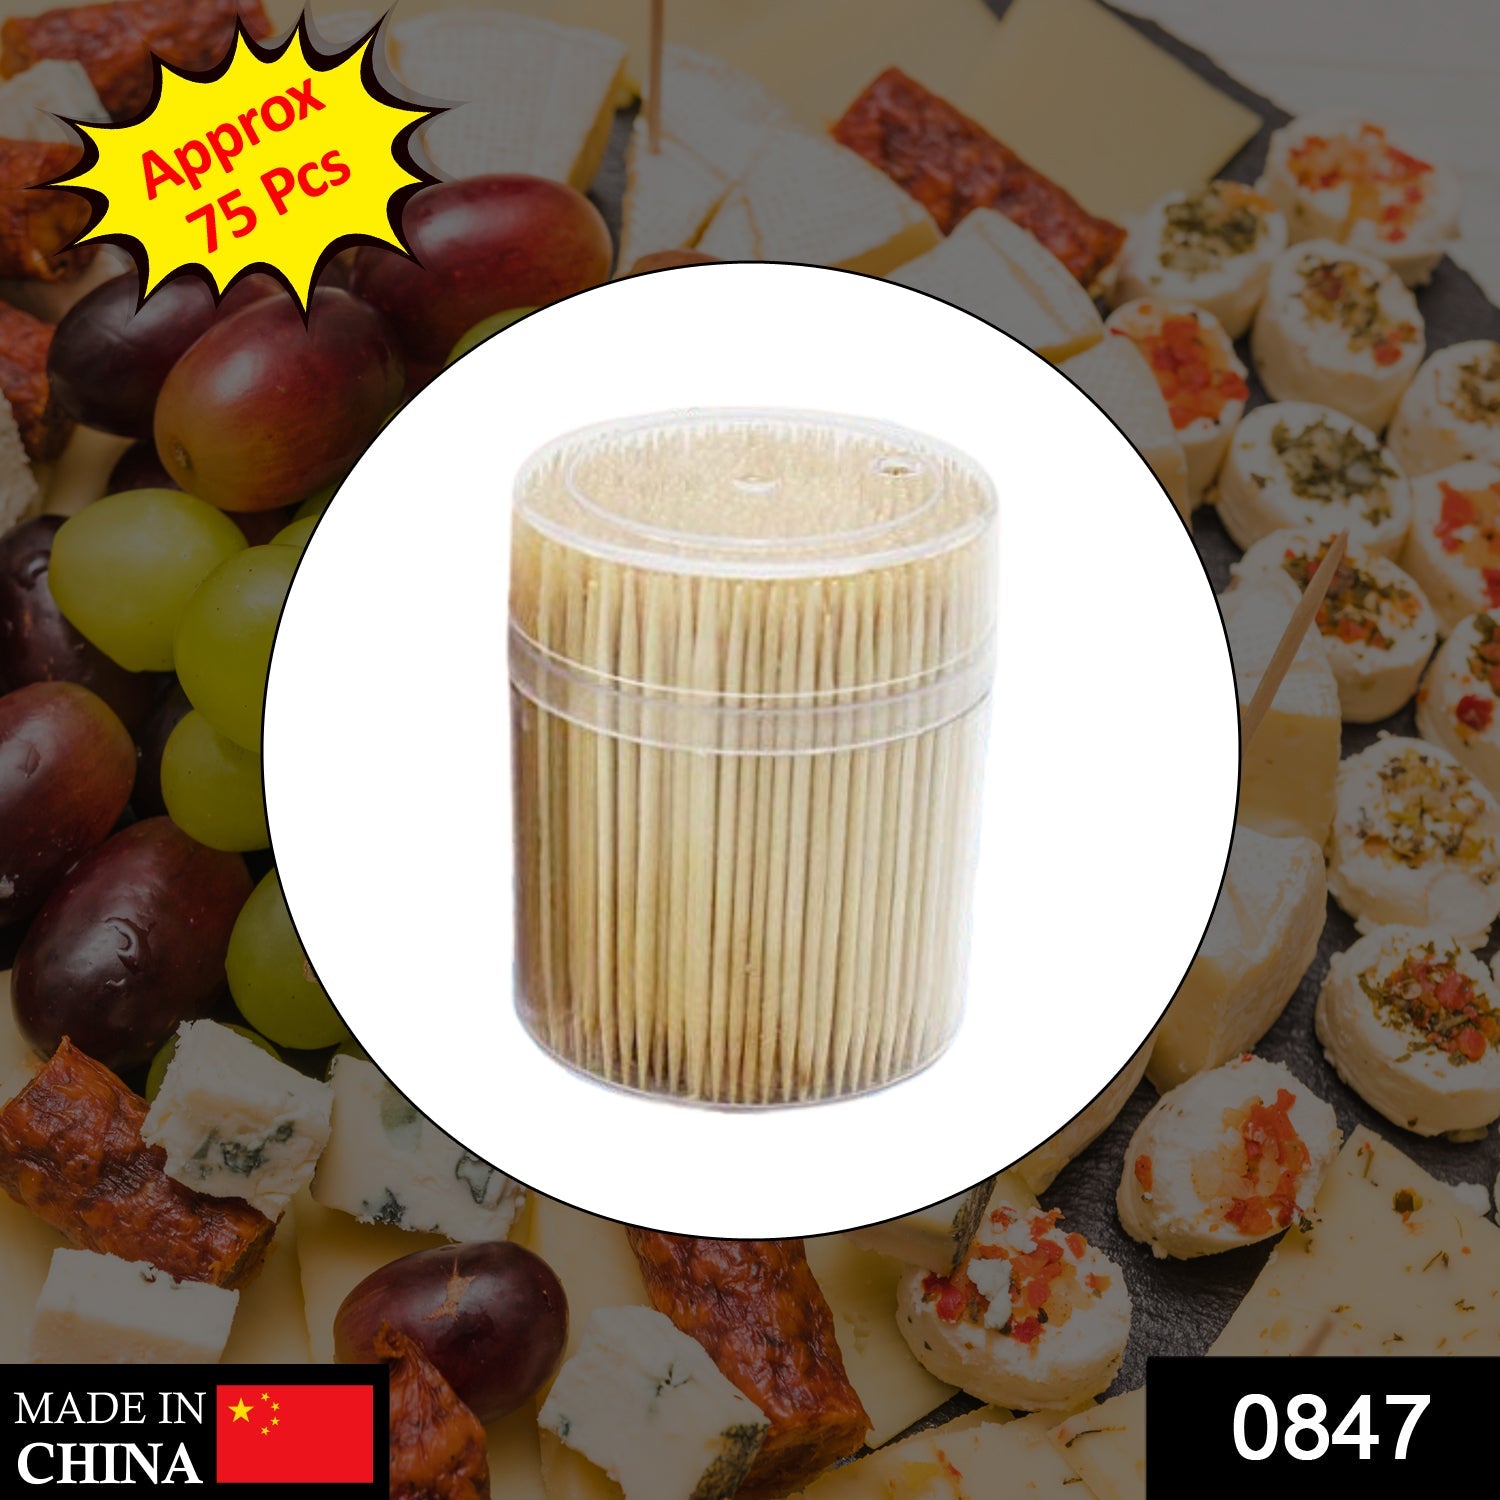 0847 Simple Wooden Toothpicks with Dispenser Box freeshipping - DeoDap